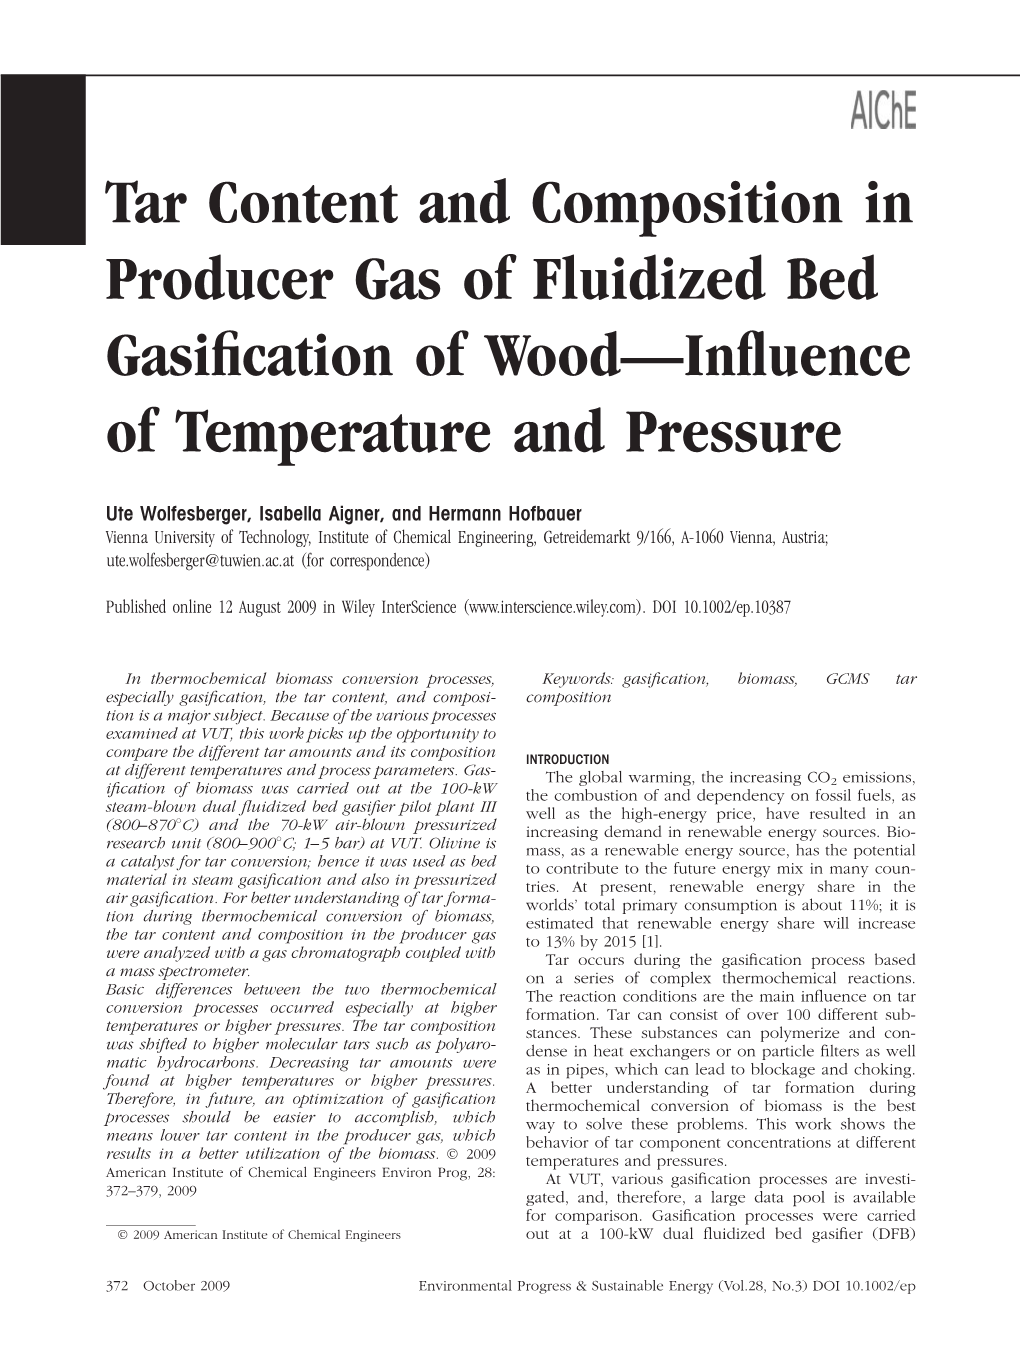 Tar Content and Composition in Producer Gas of Fluidized Bed Gasification of Wood-Influence of Temperature and Pressure